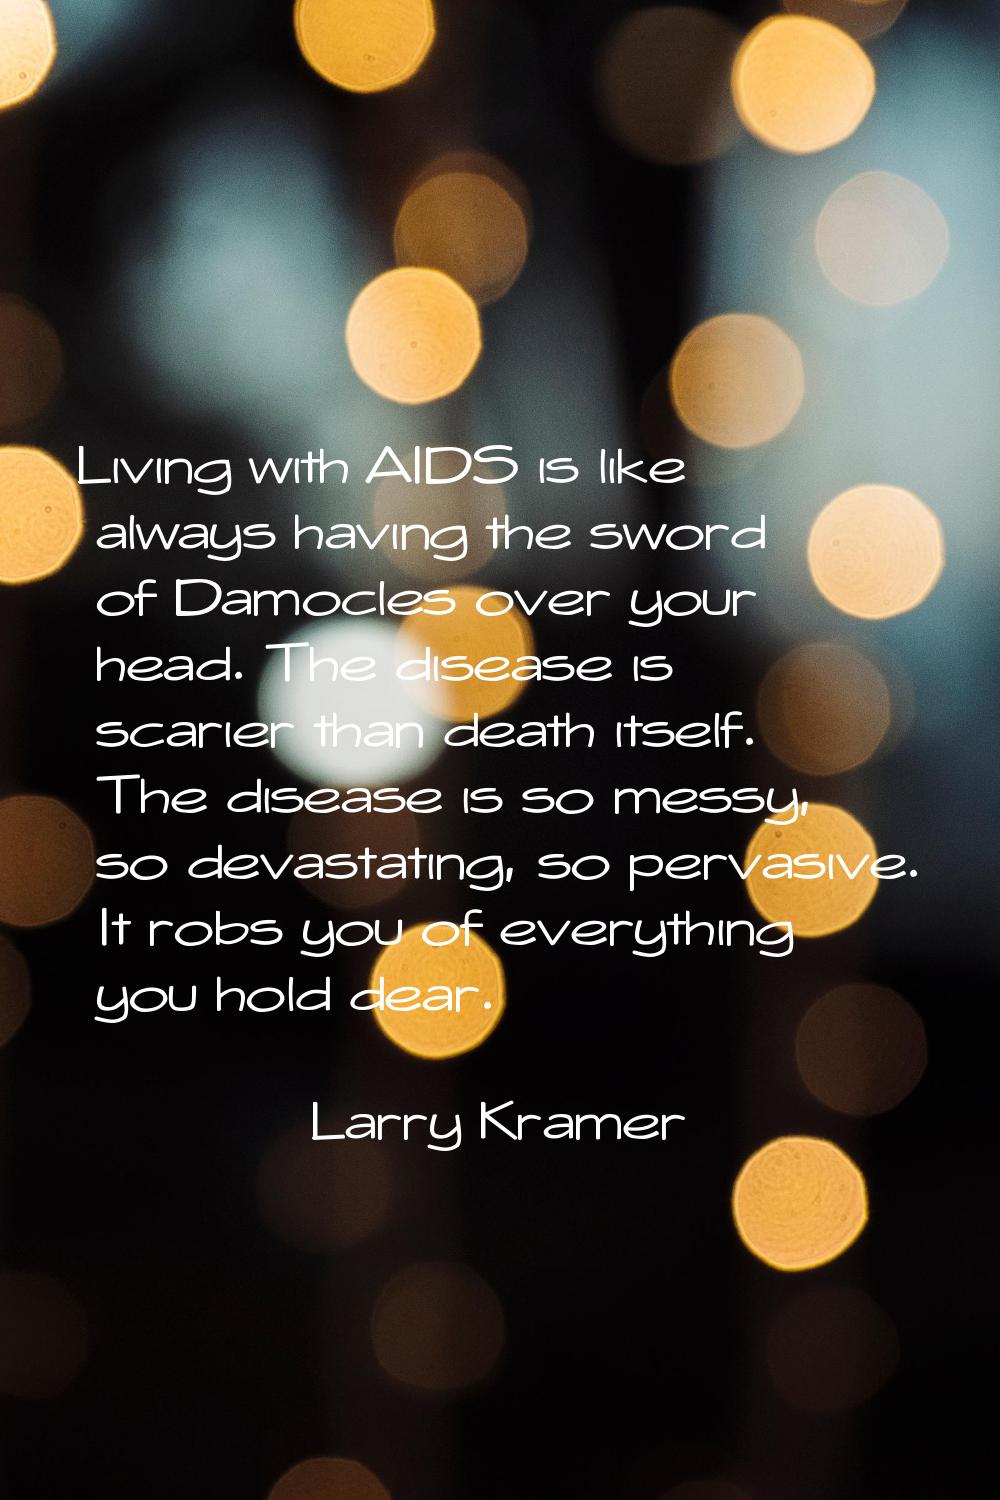 Living with AIDS is like always having the sword of Damocles over your head. The disease is scarier